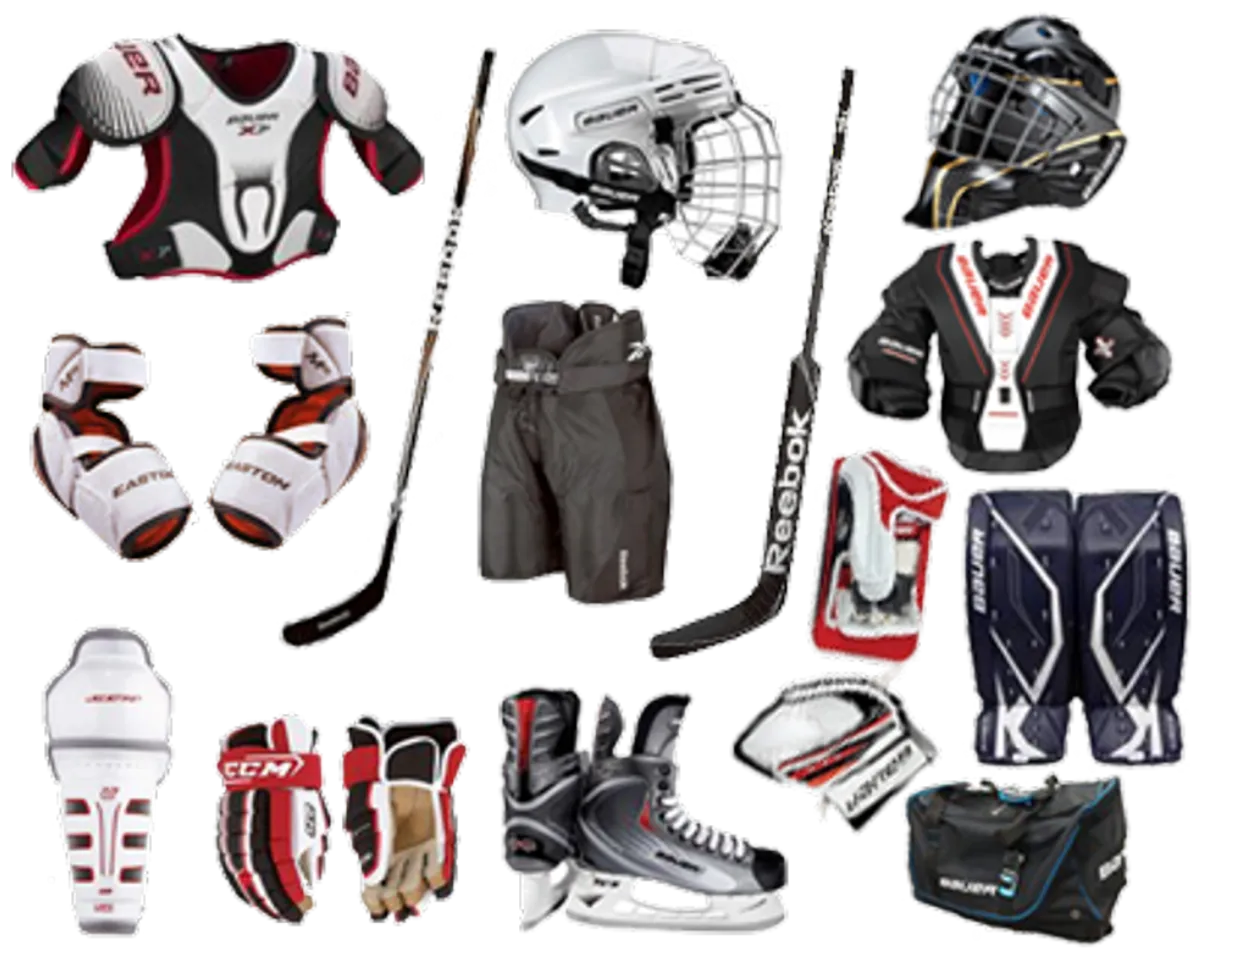 Gear Up: The Athlete’s Complete Equipment Guide